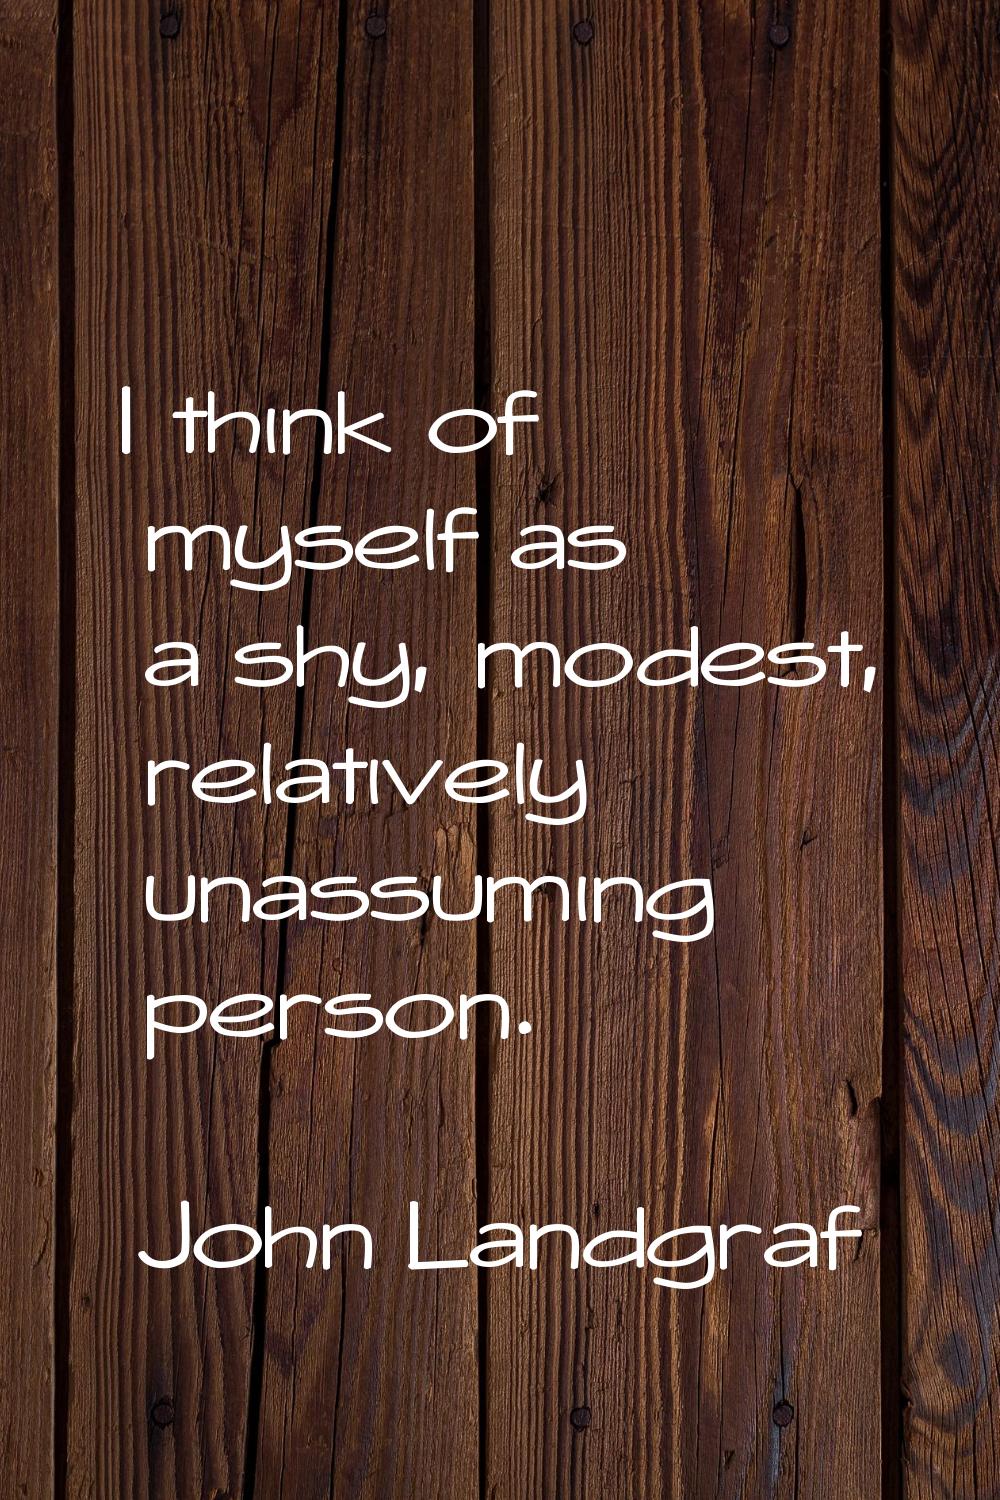 I think of myself as a shy, modest, relatively unassuming person.